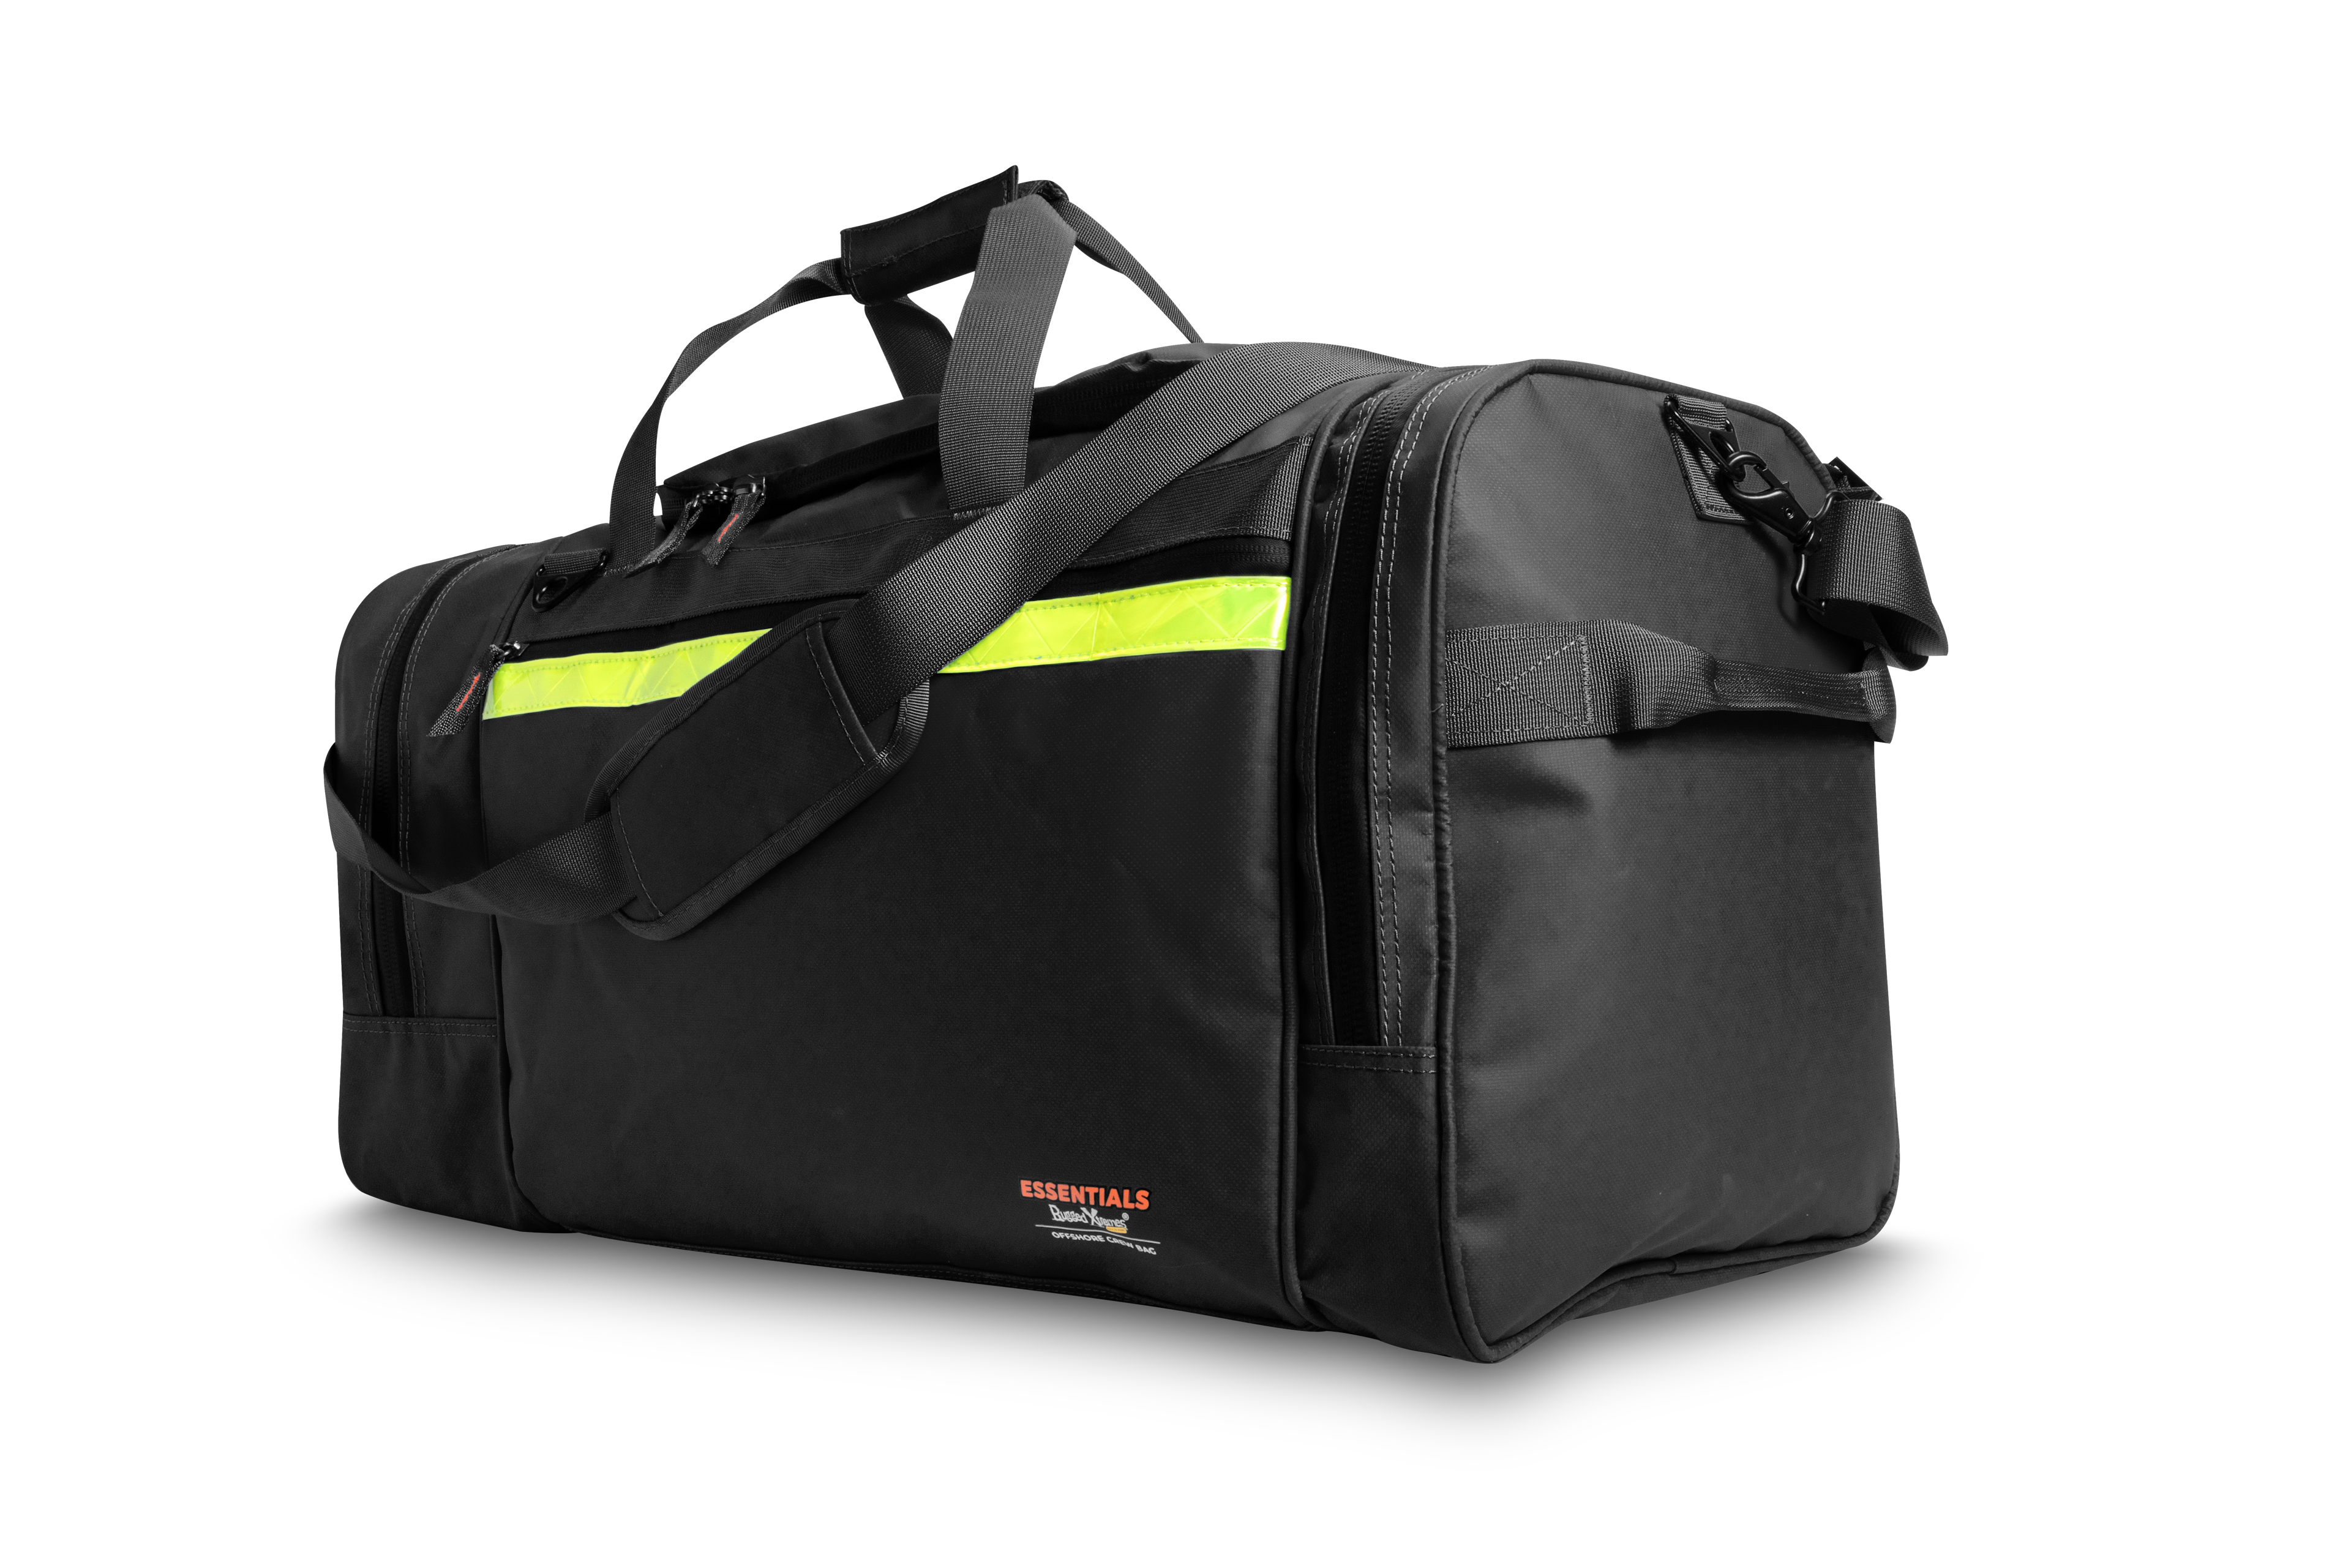 Rugged Xtremes PVC Offshore Crew Bag